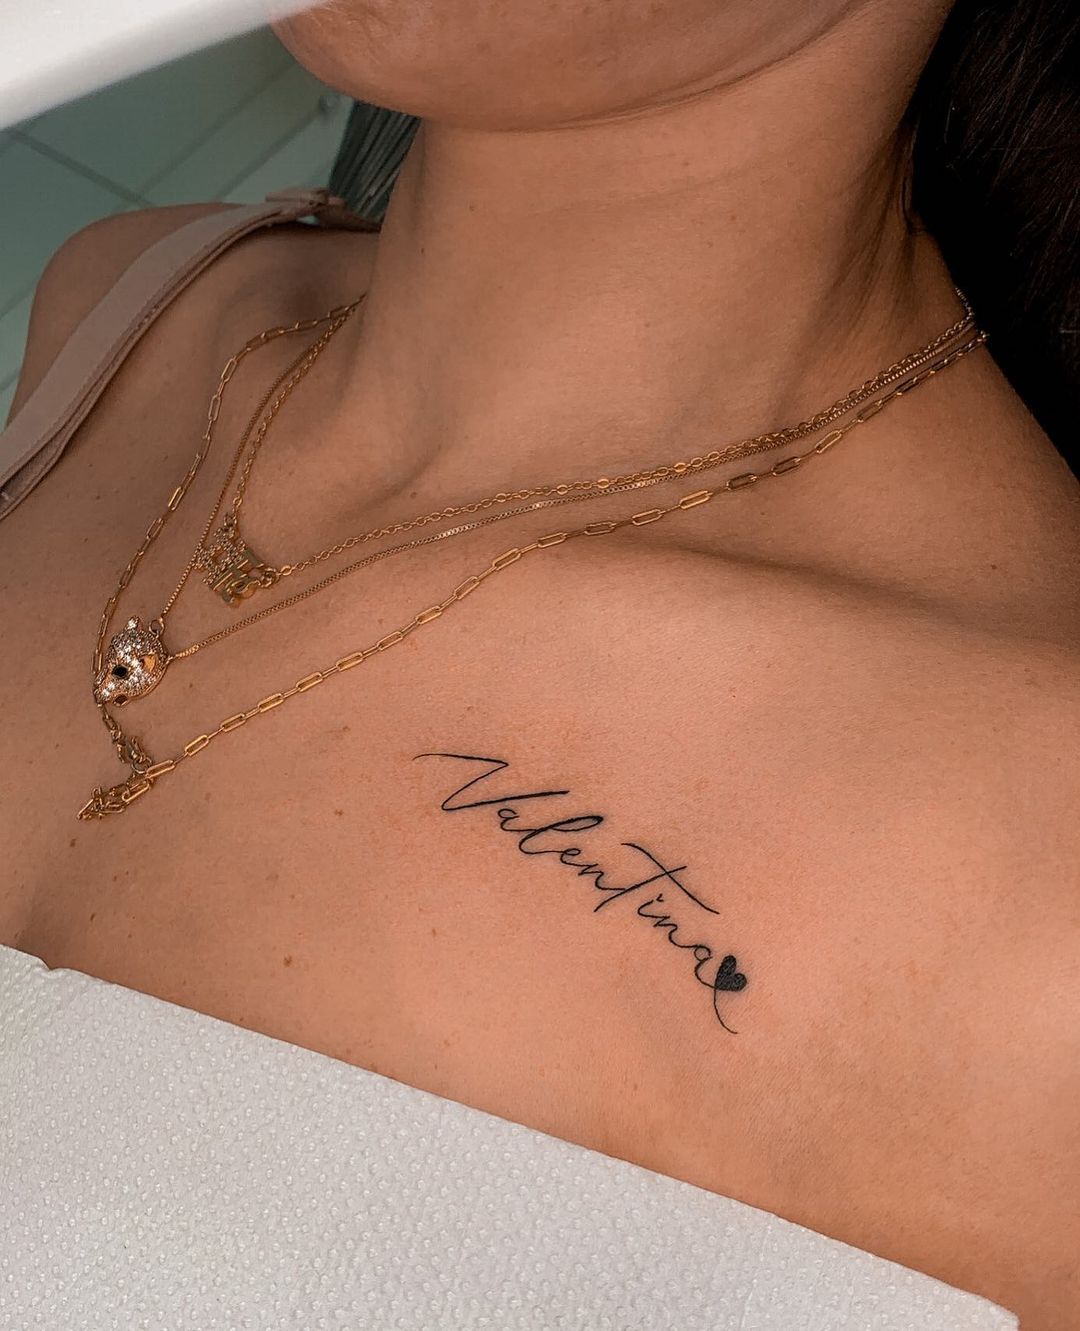 rose tattoos on chest with names